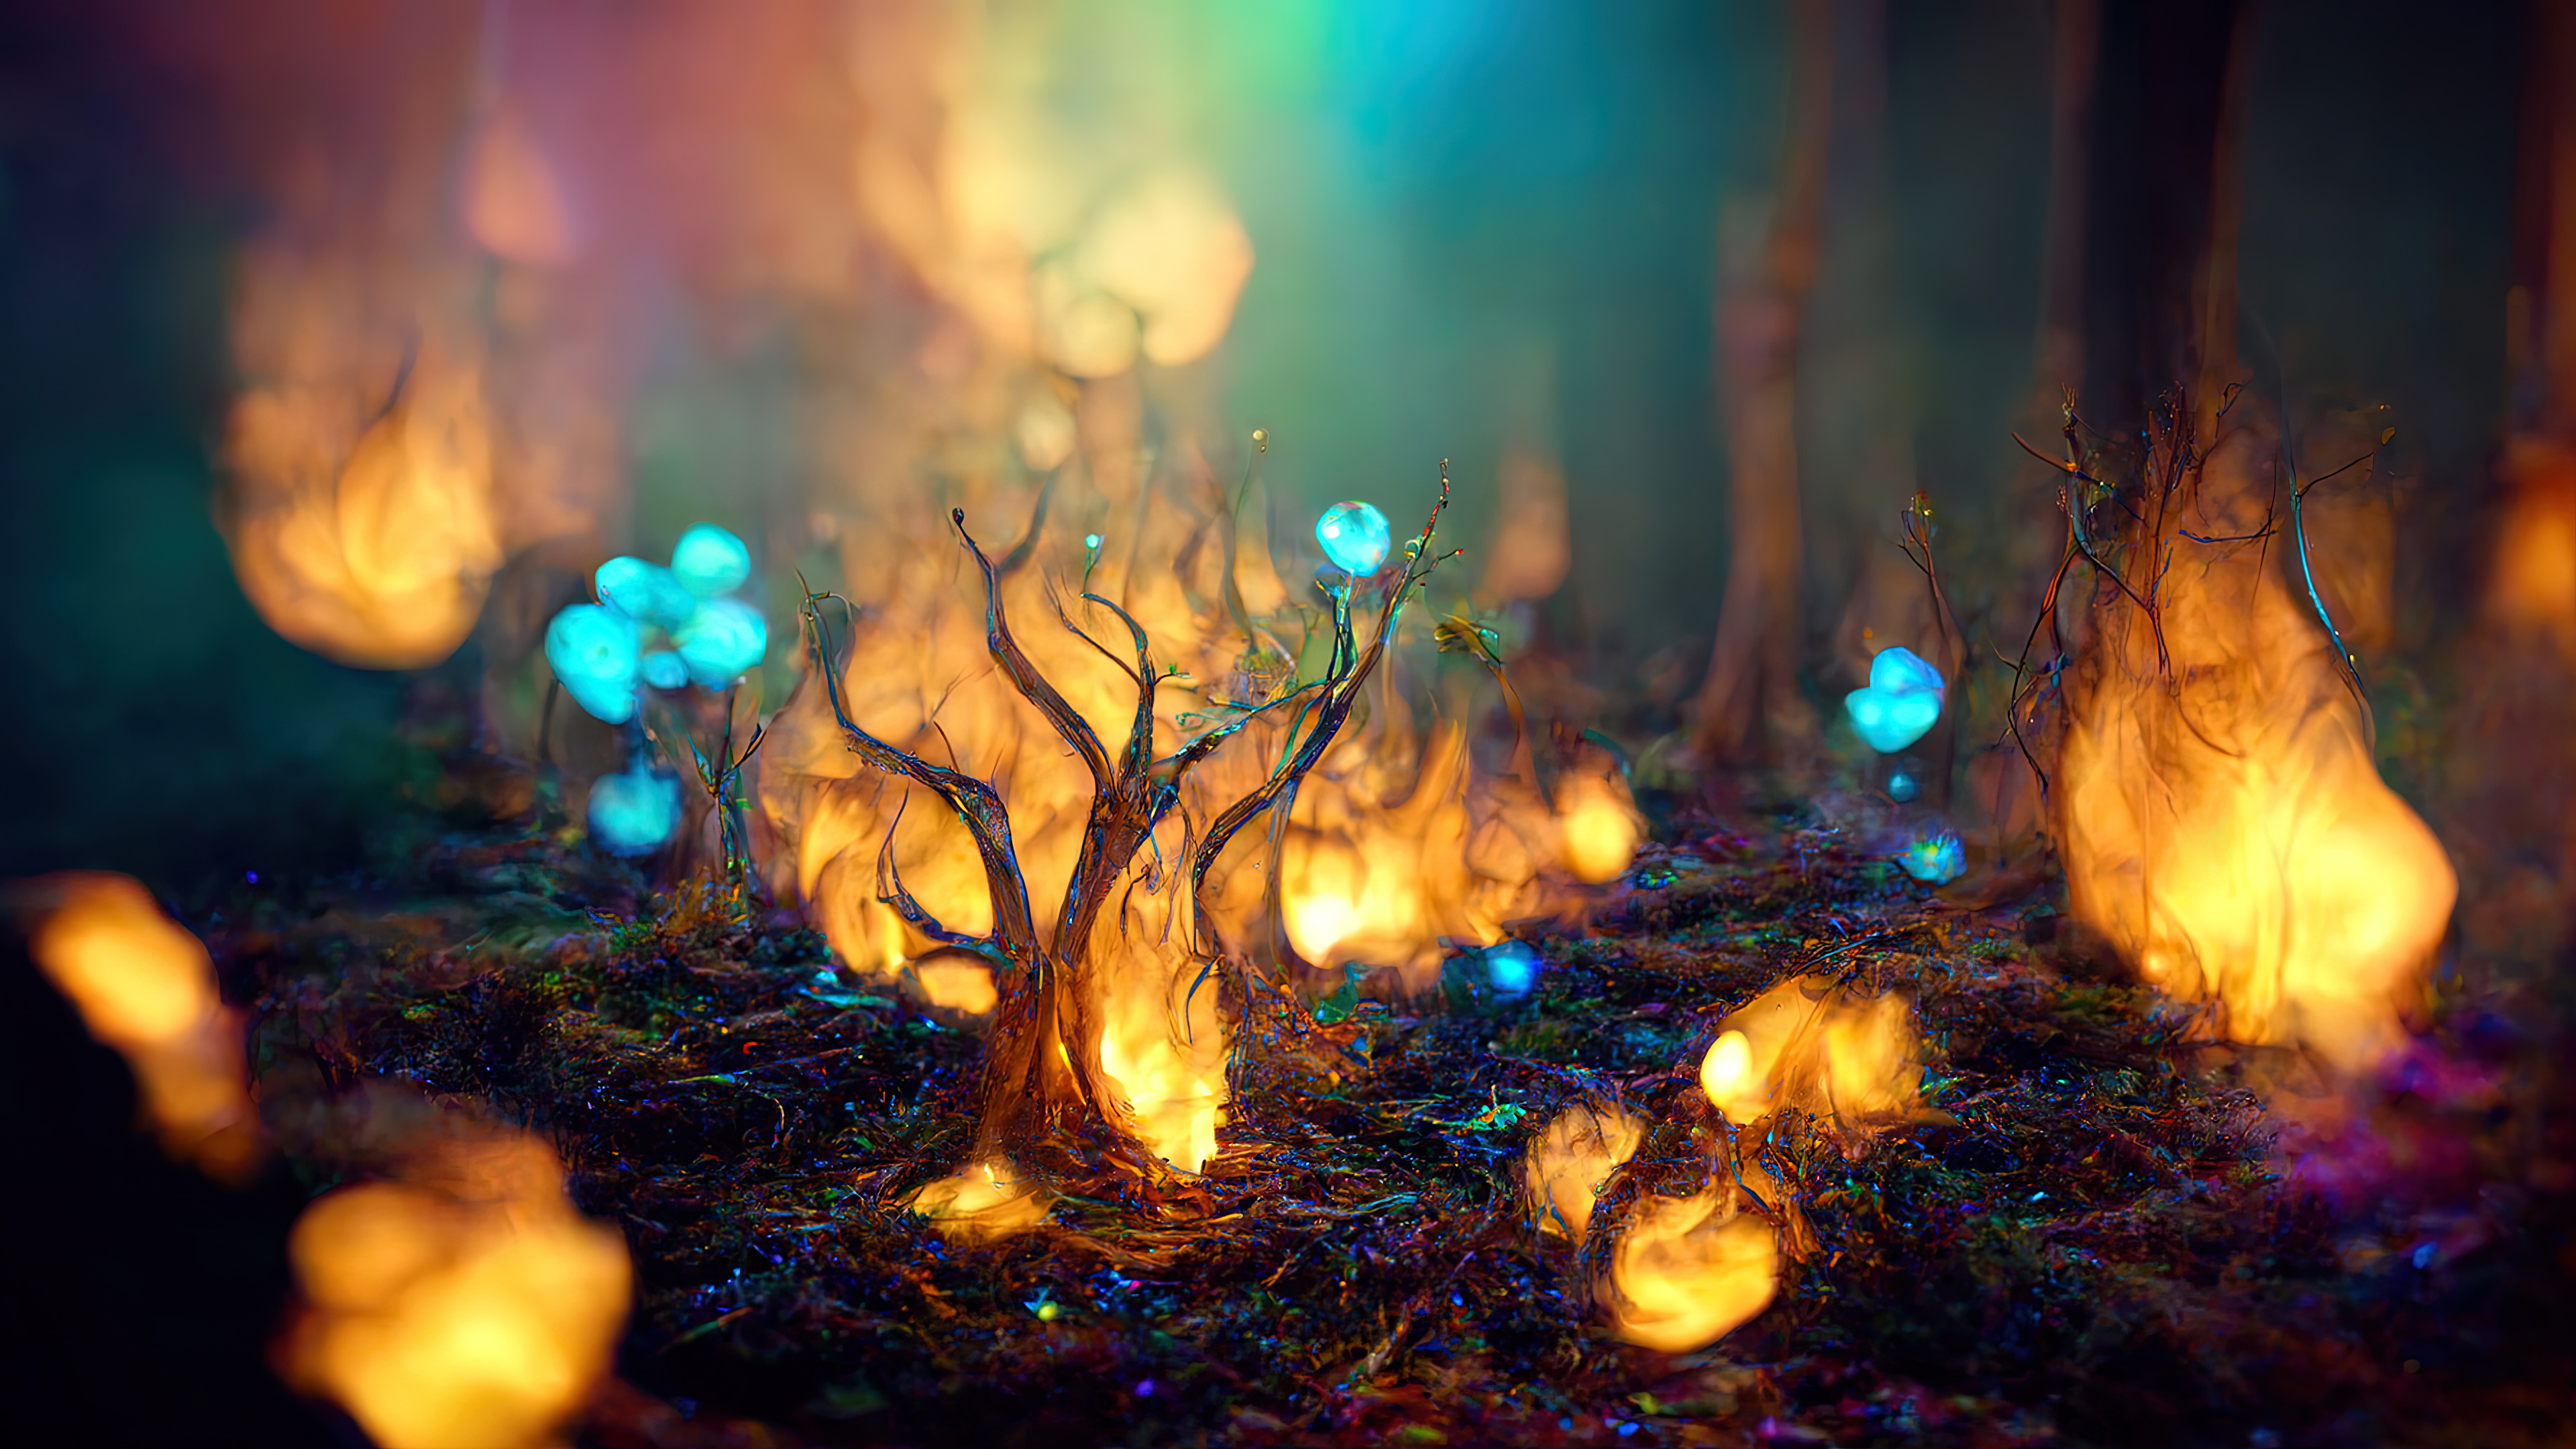 Magical forest Wallpaper 4K Whimsical plants 9687